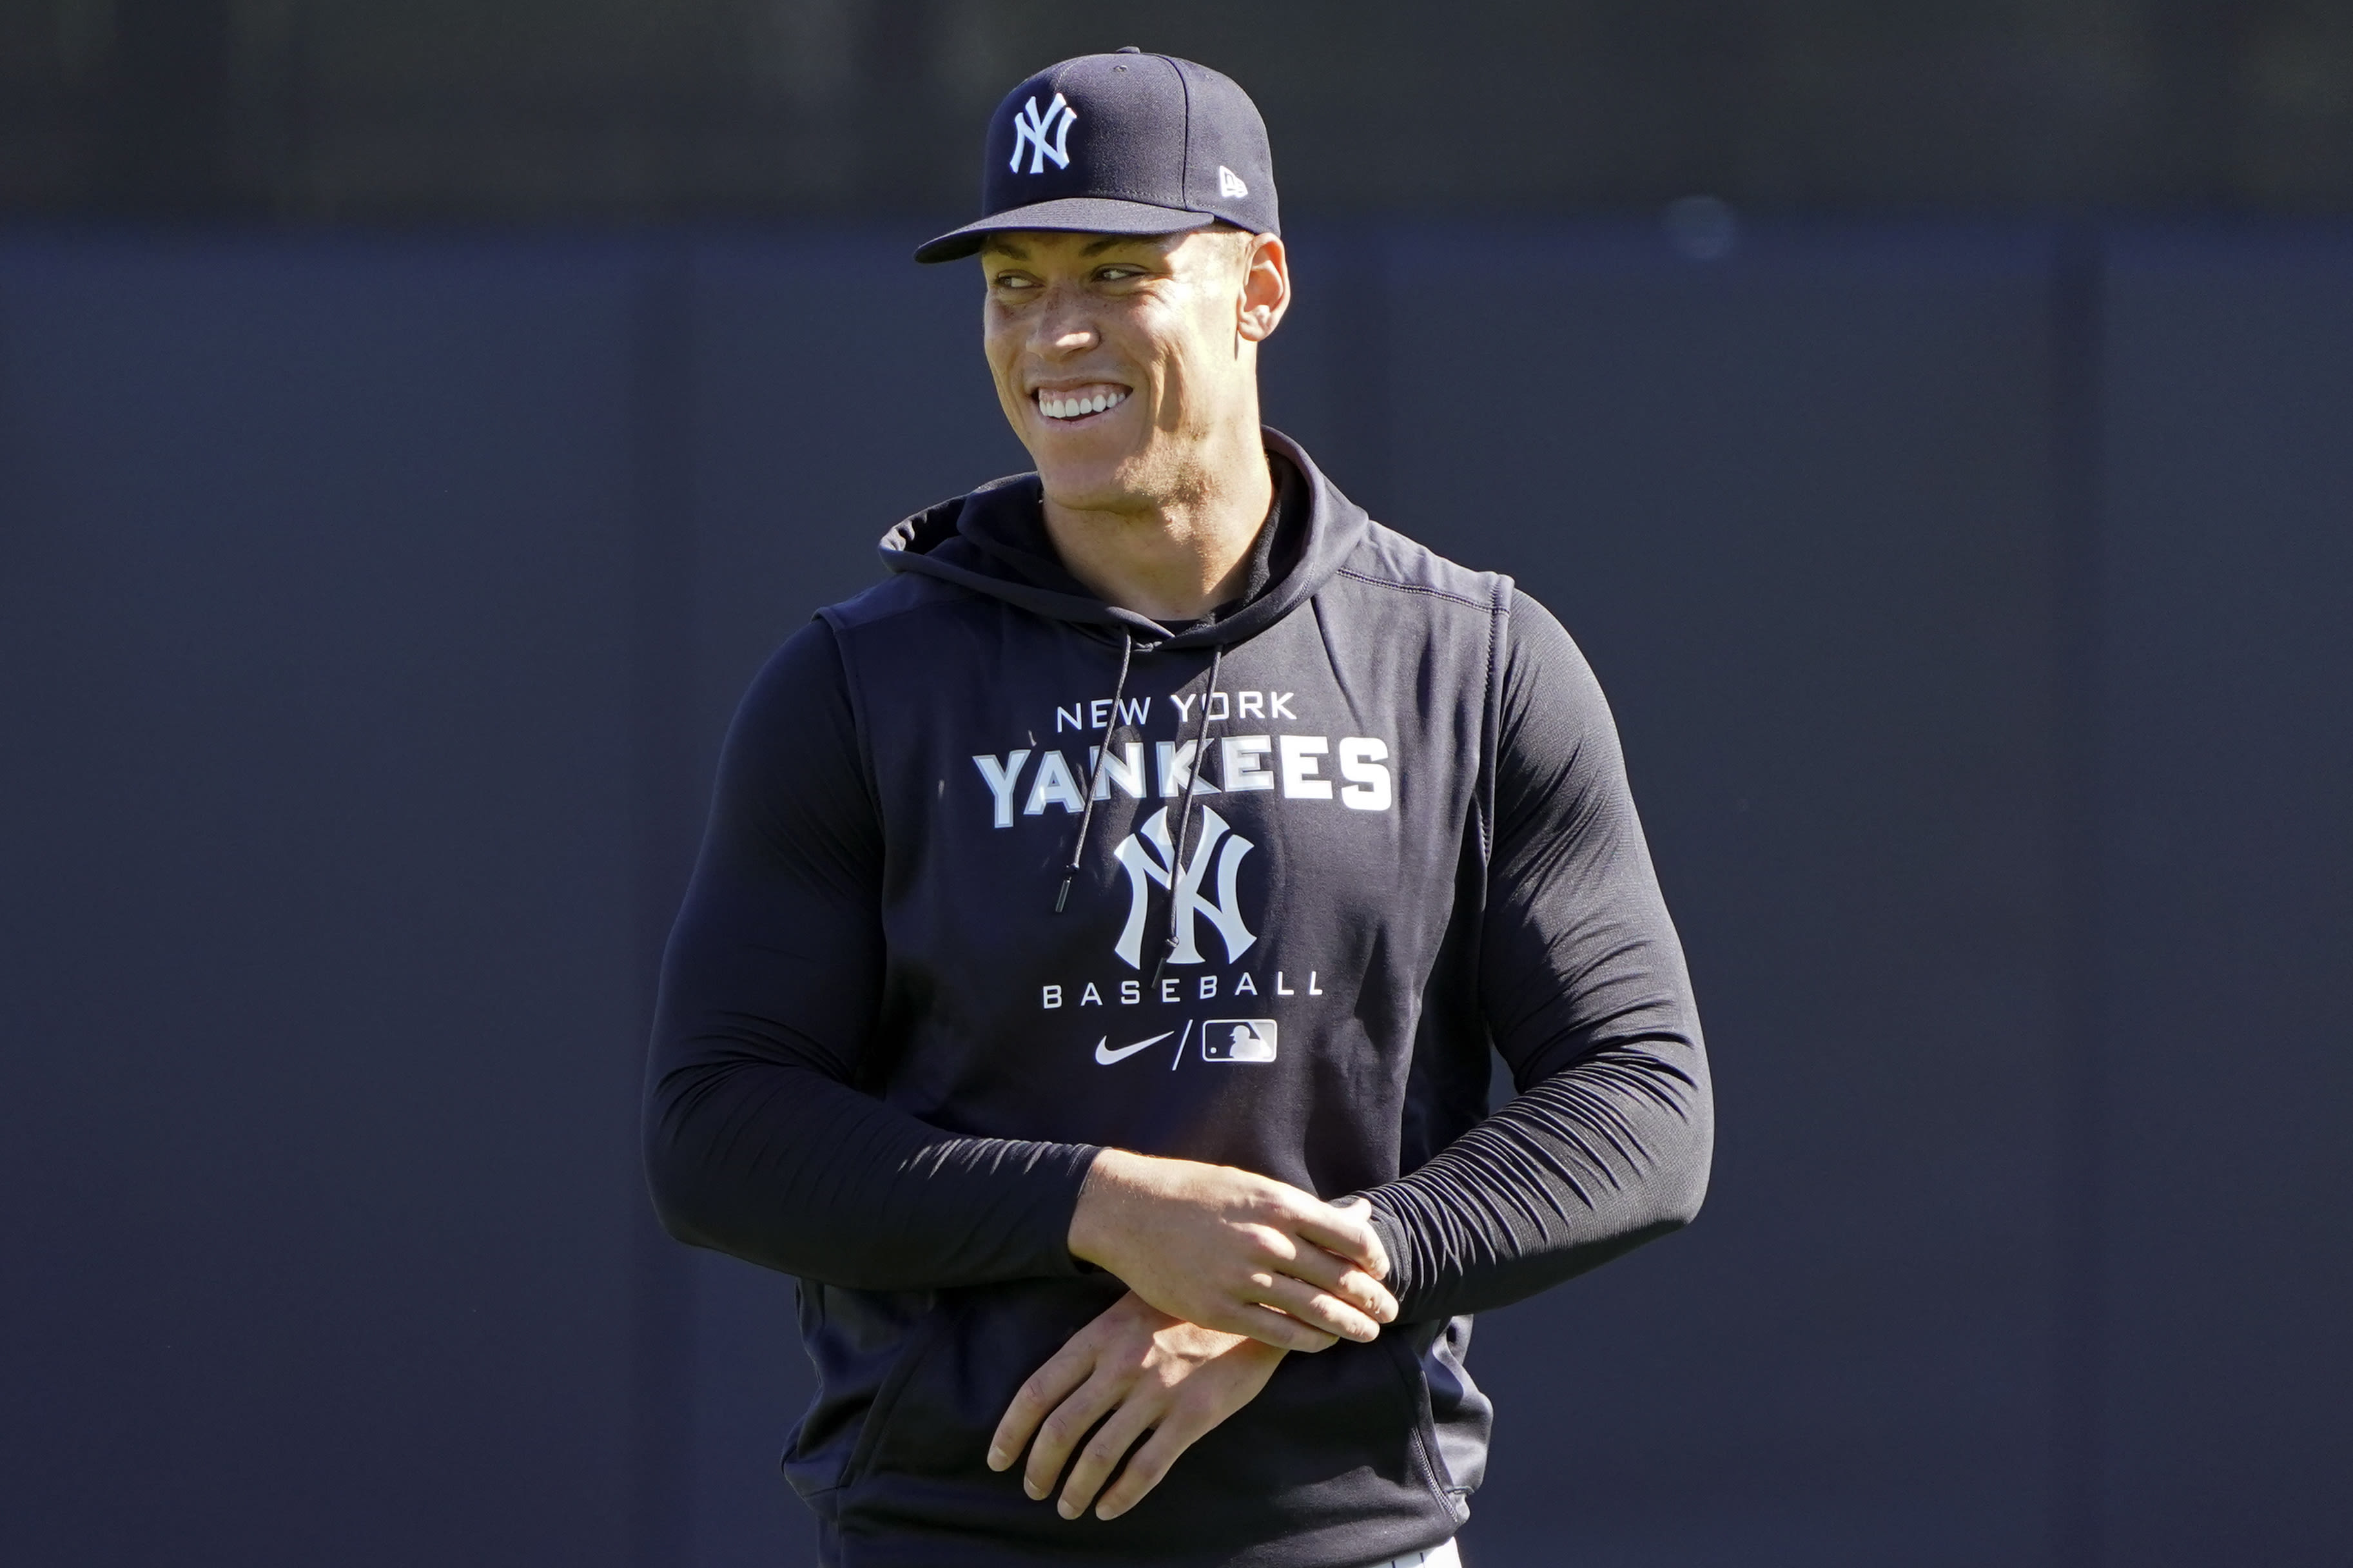 Yankees star Aaron Judge will miss at least three weeks with